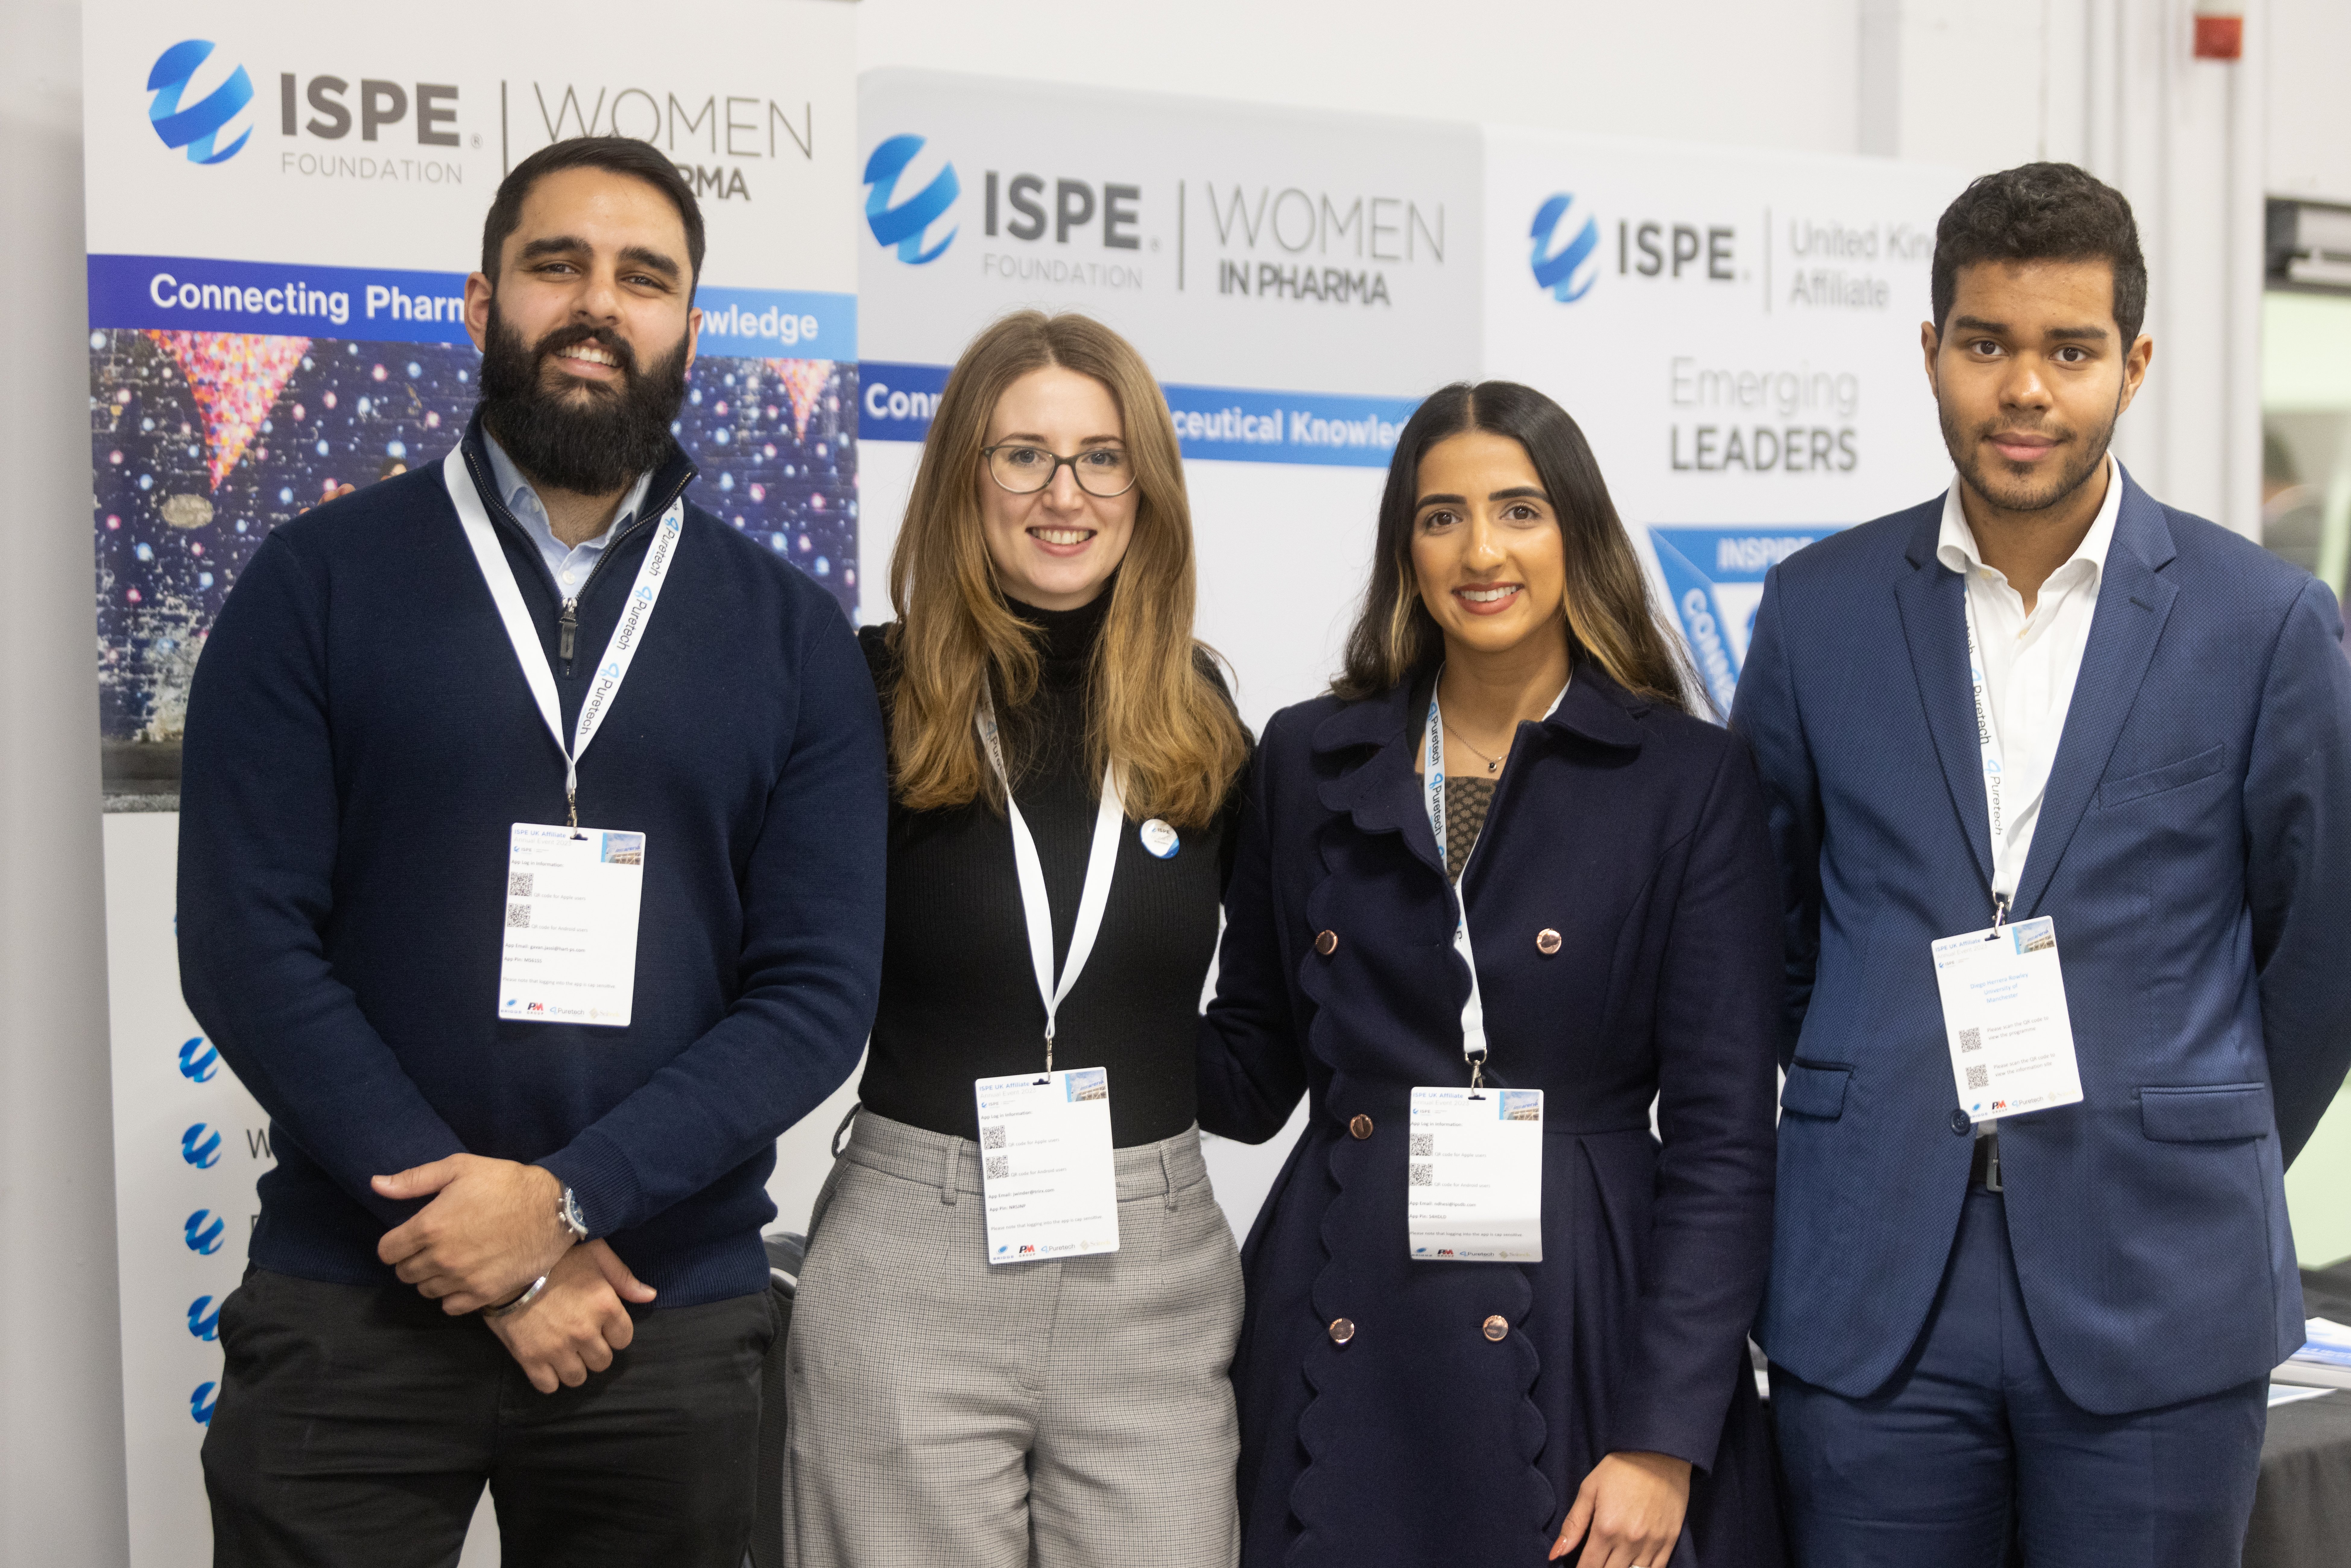 With ISPE EL Committee members at stand during conference